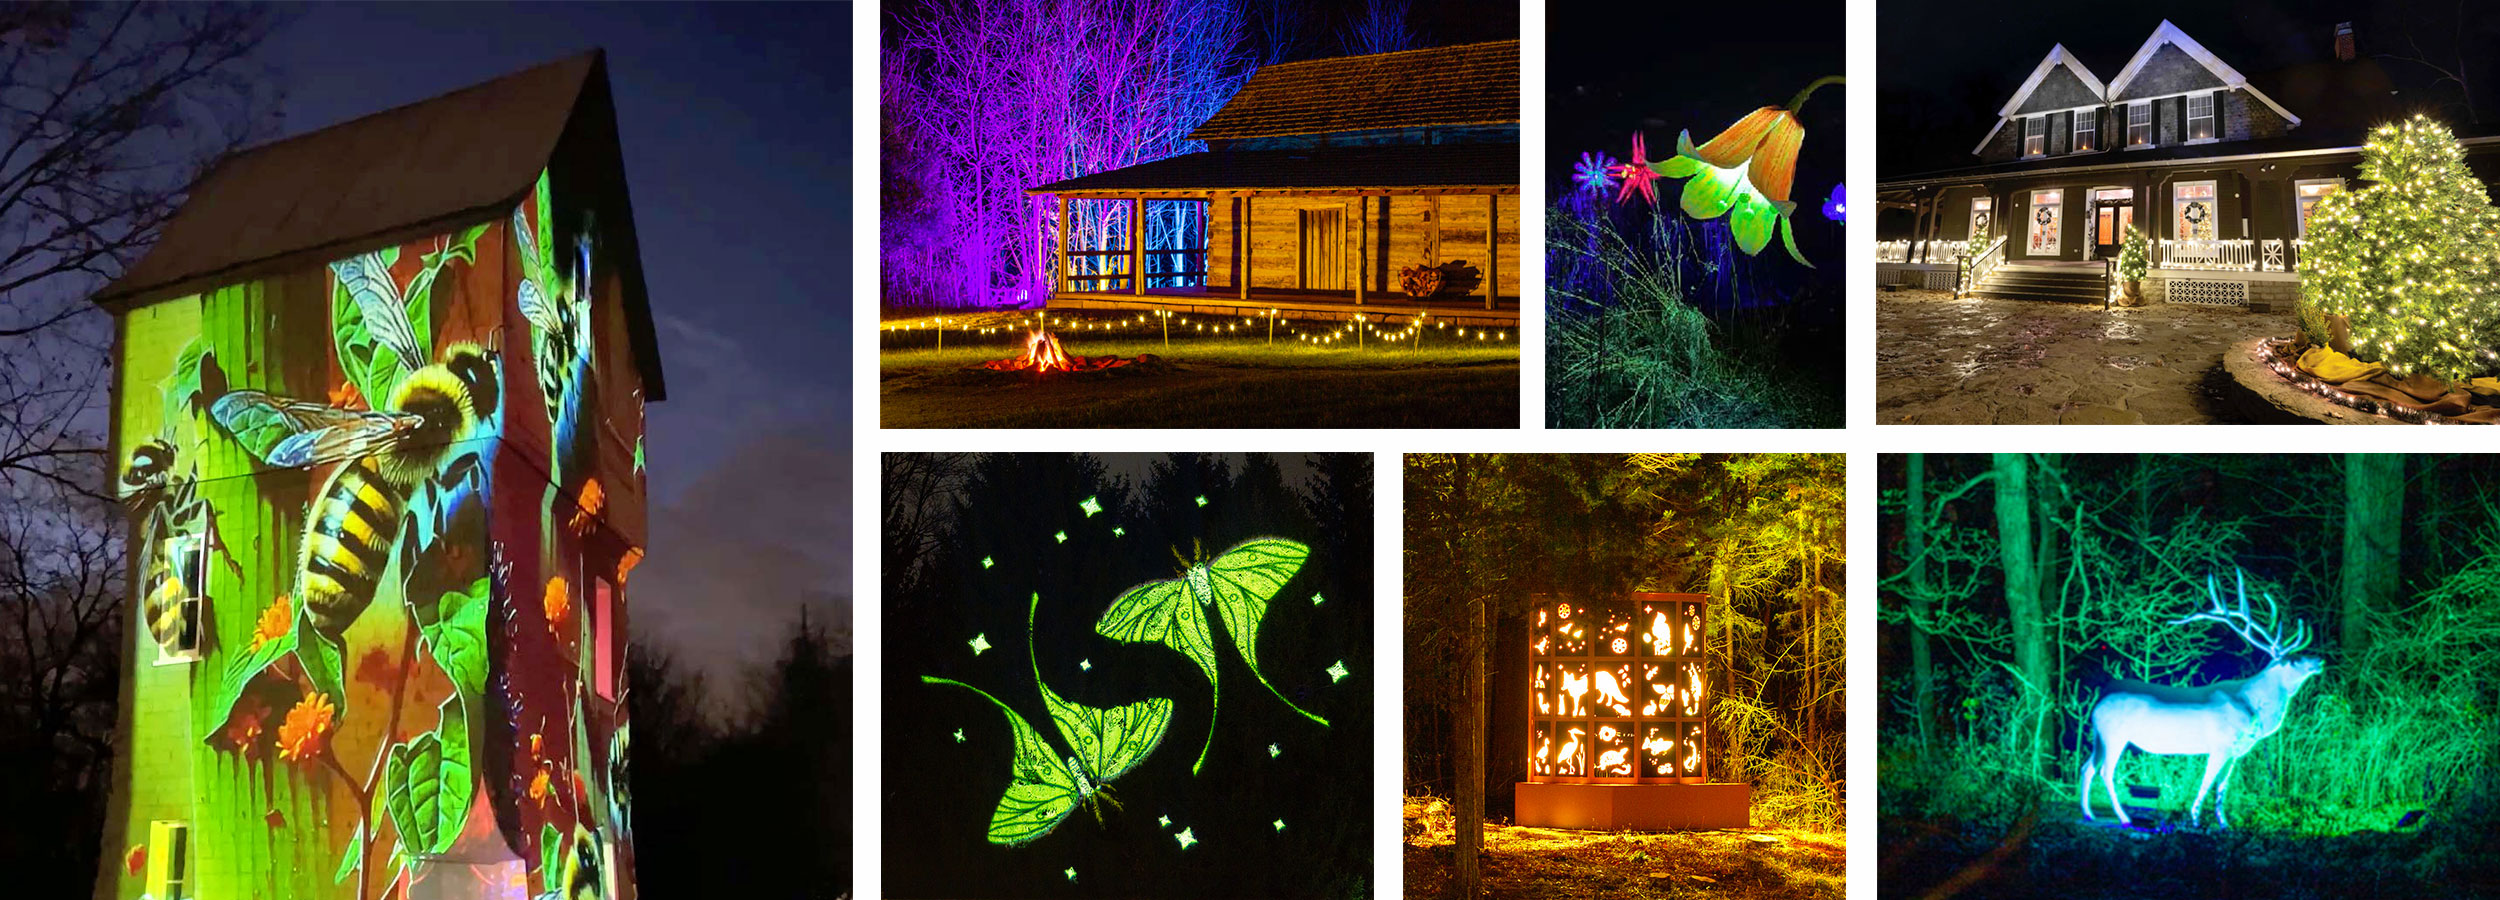 Collage of images from past year's Light in the Forest light installations.